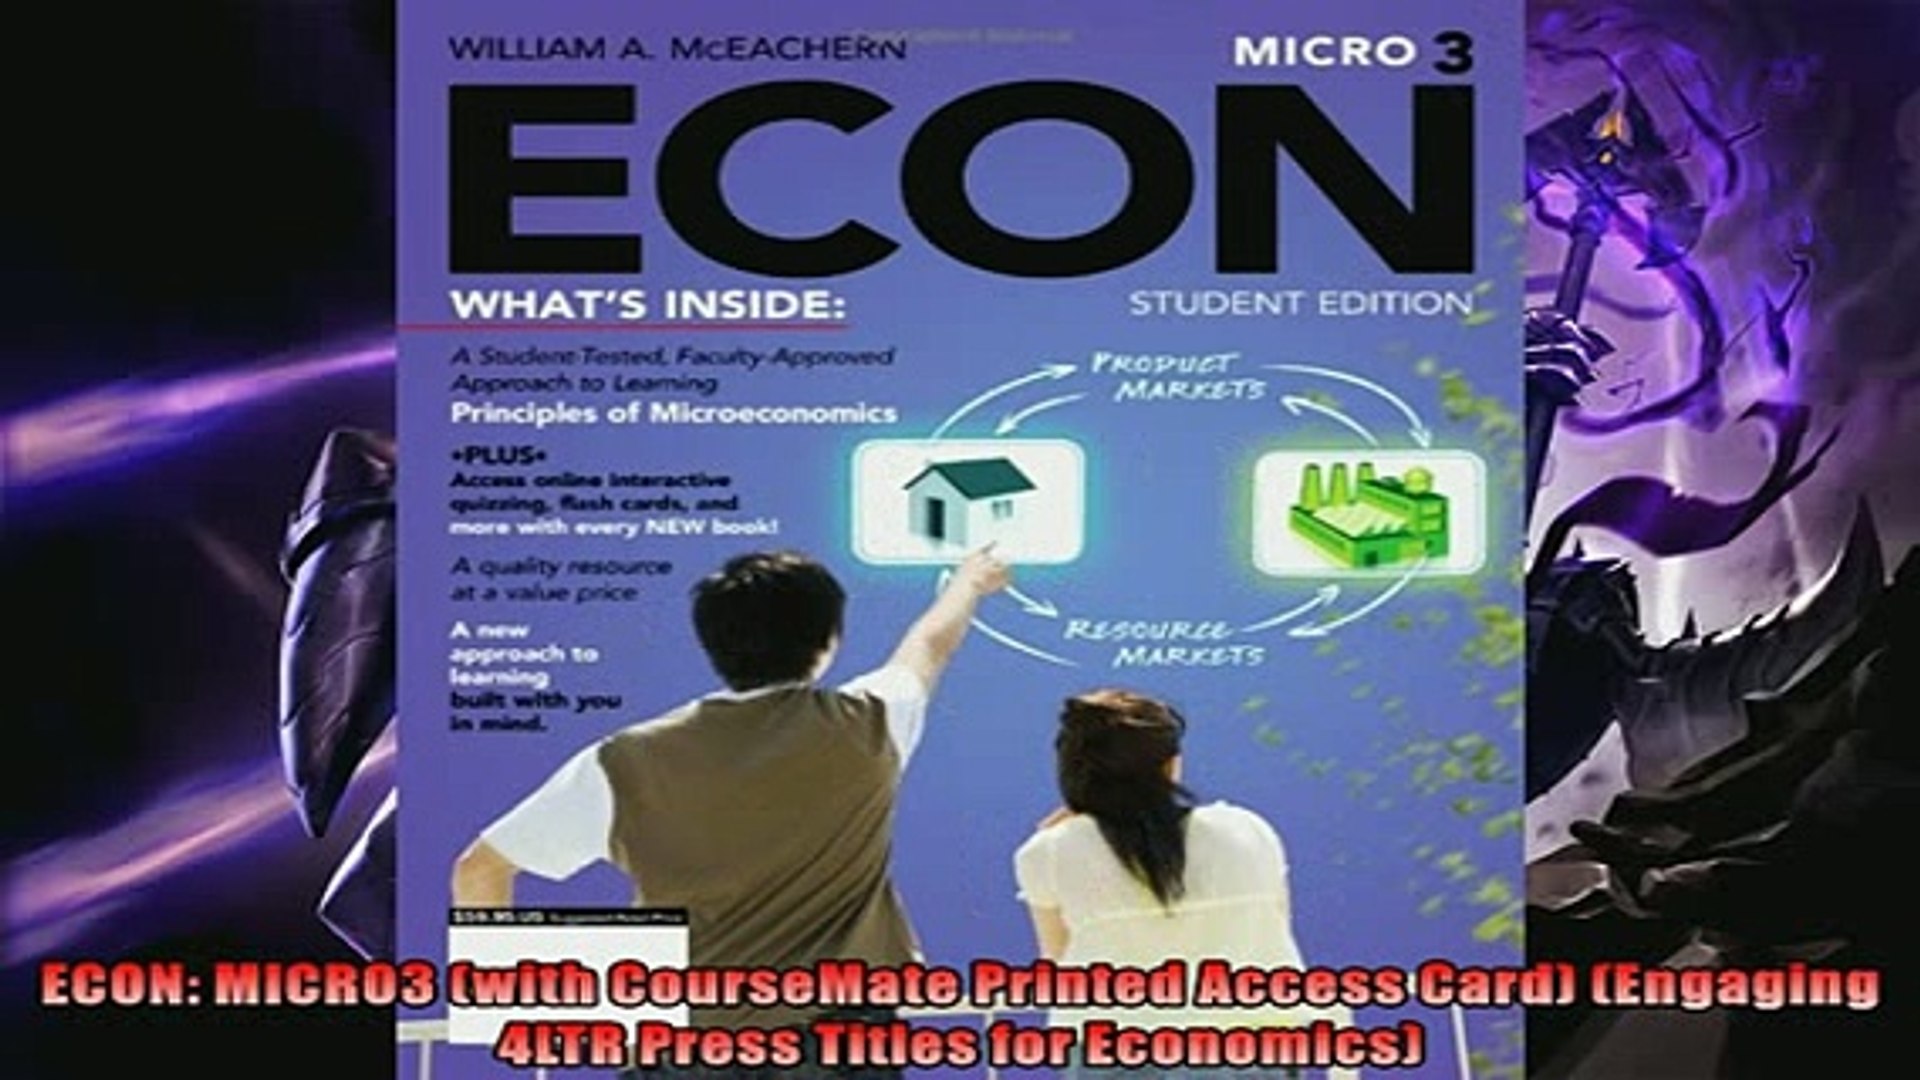 ⁣Read here ECON MICRO3 with CourseMate Printed Access Card Engaging 4LTR Press Titles for